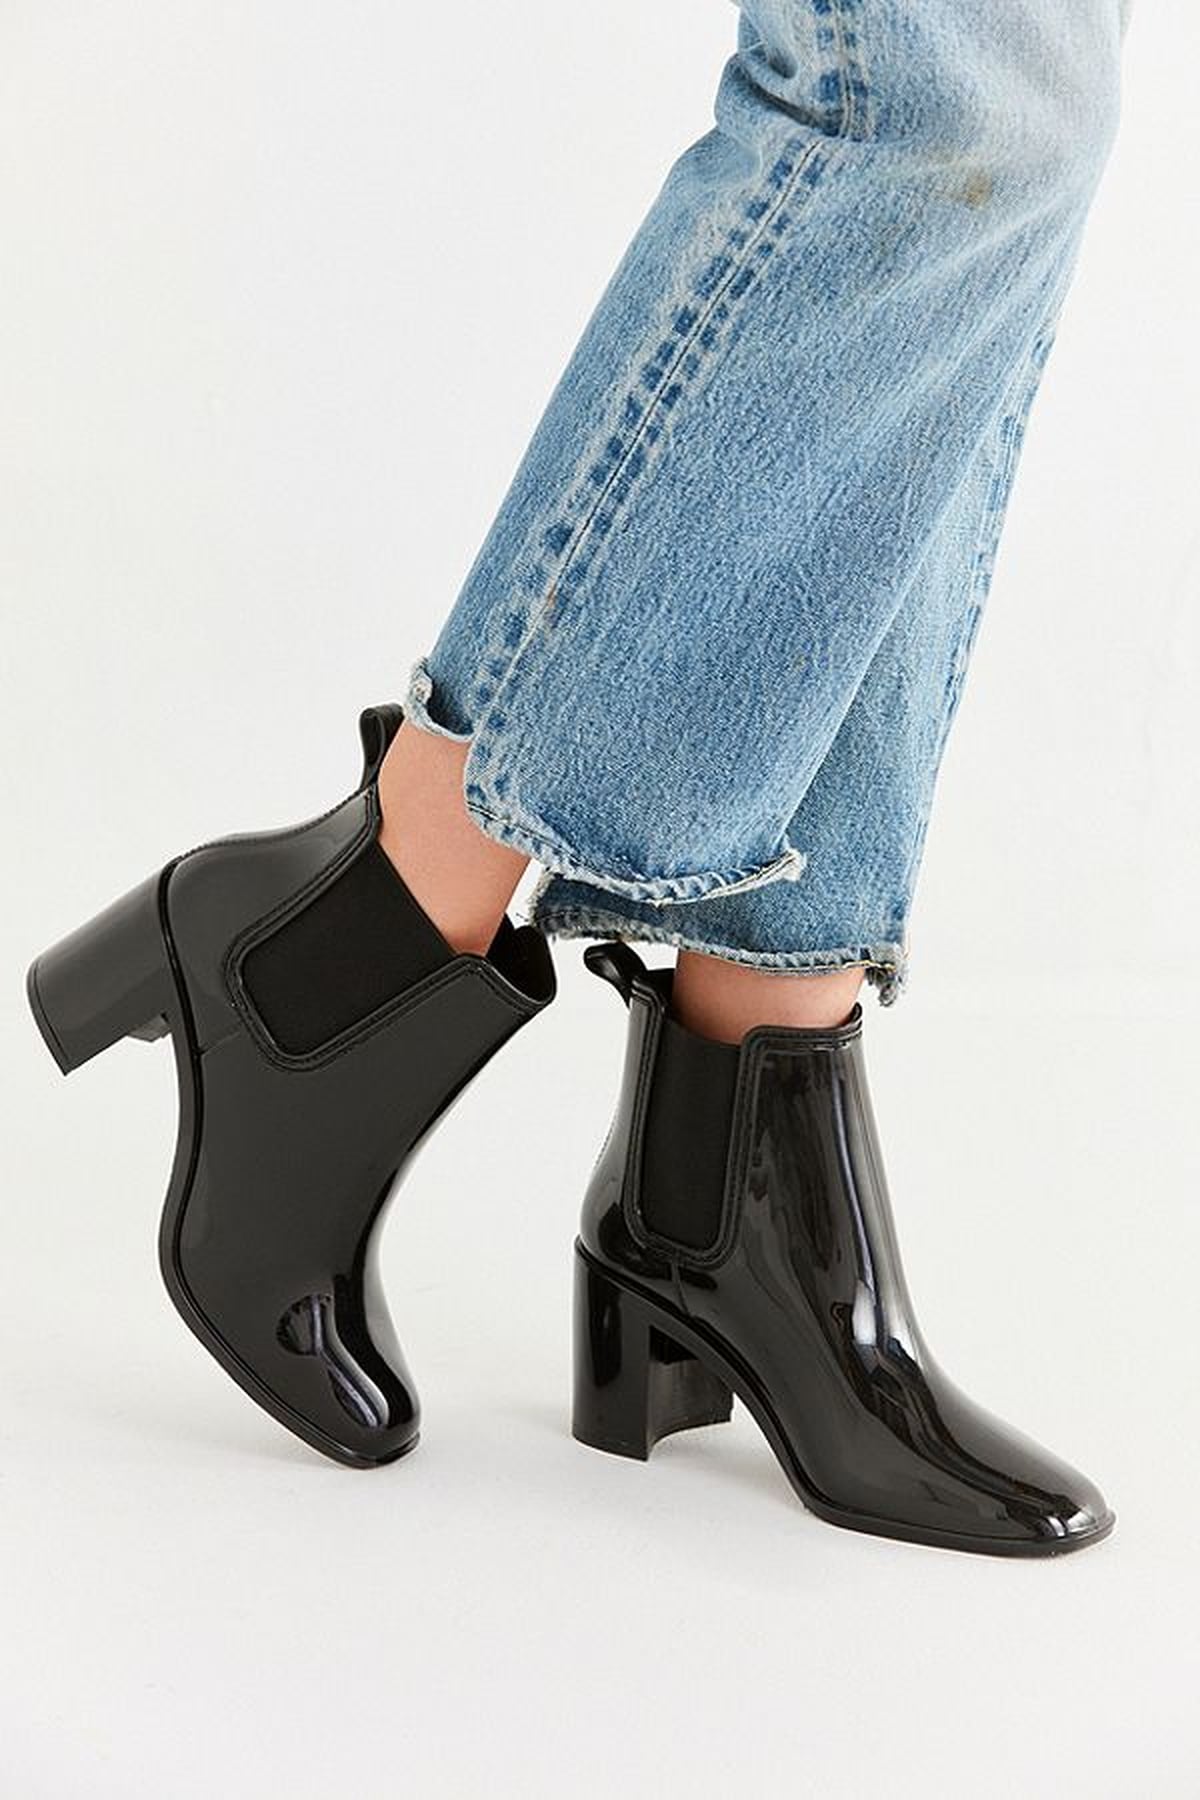 Best Boots From Urban Outfitters | POPSUGAR Fashion